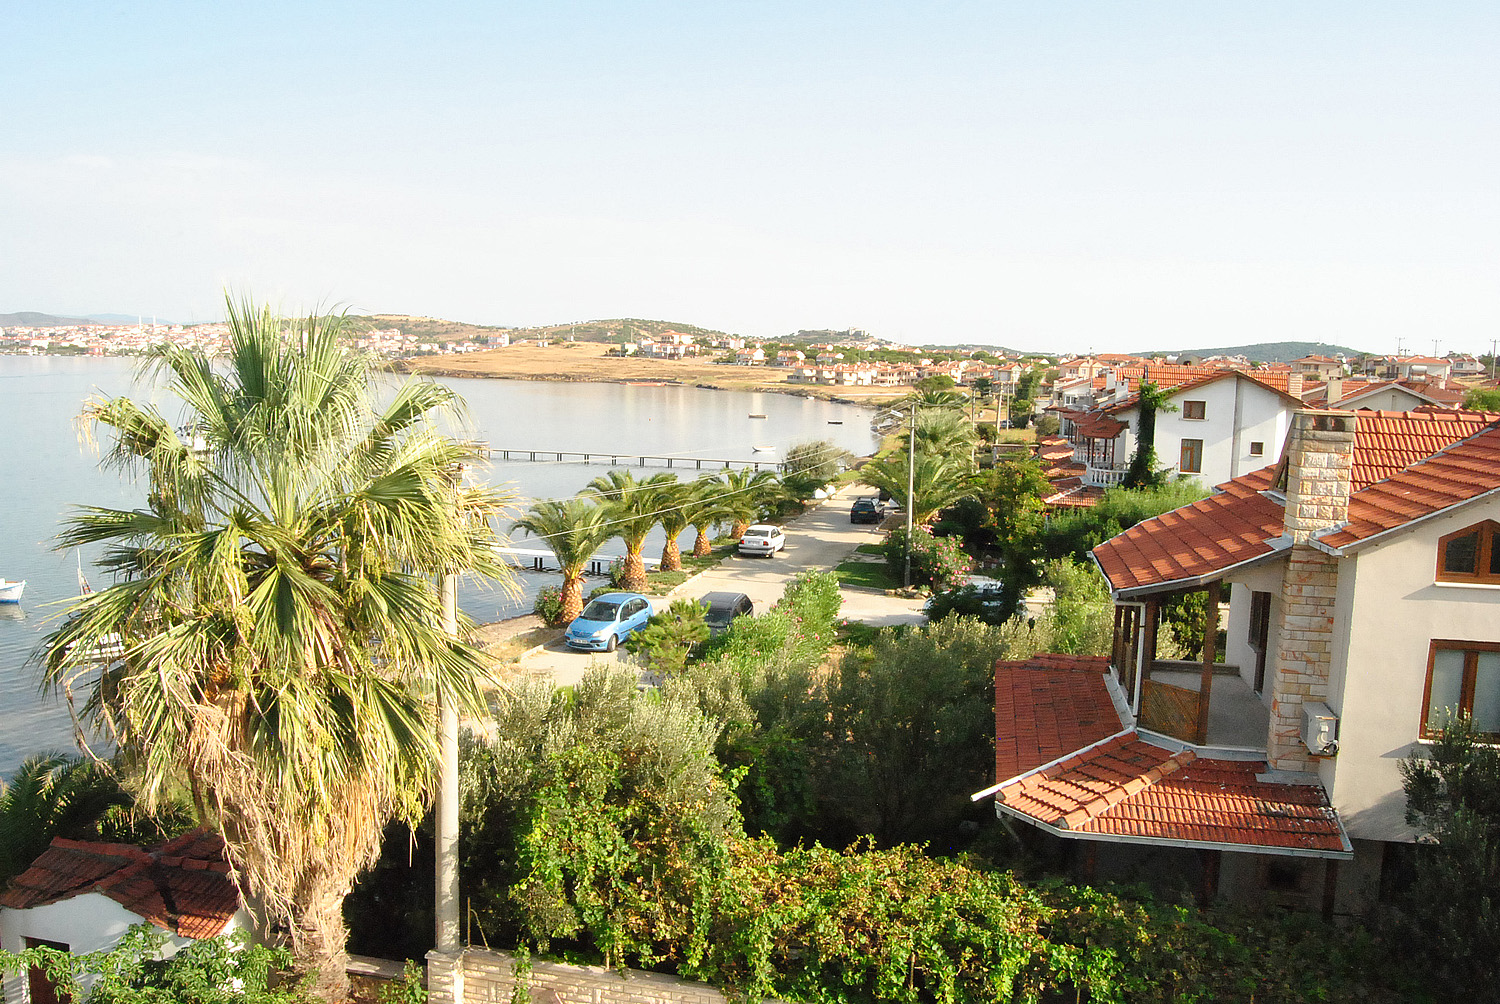 The view from Erol Hotel in Cunda Island